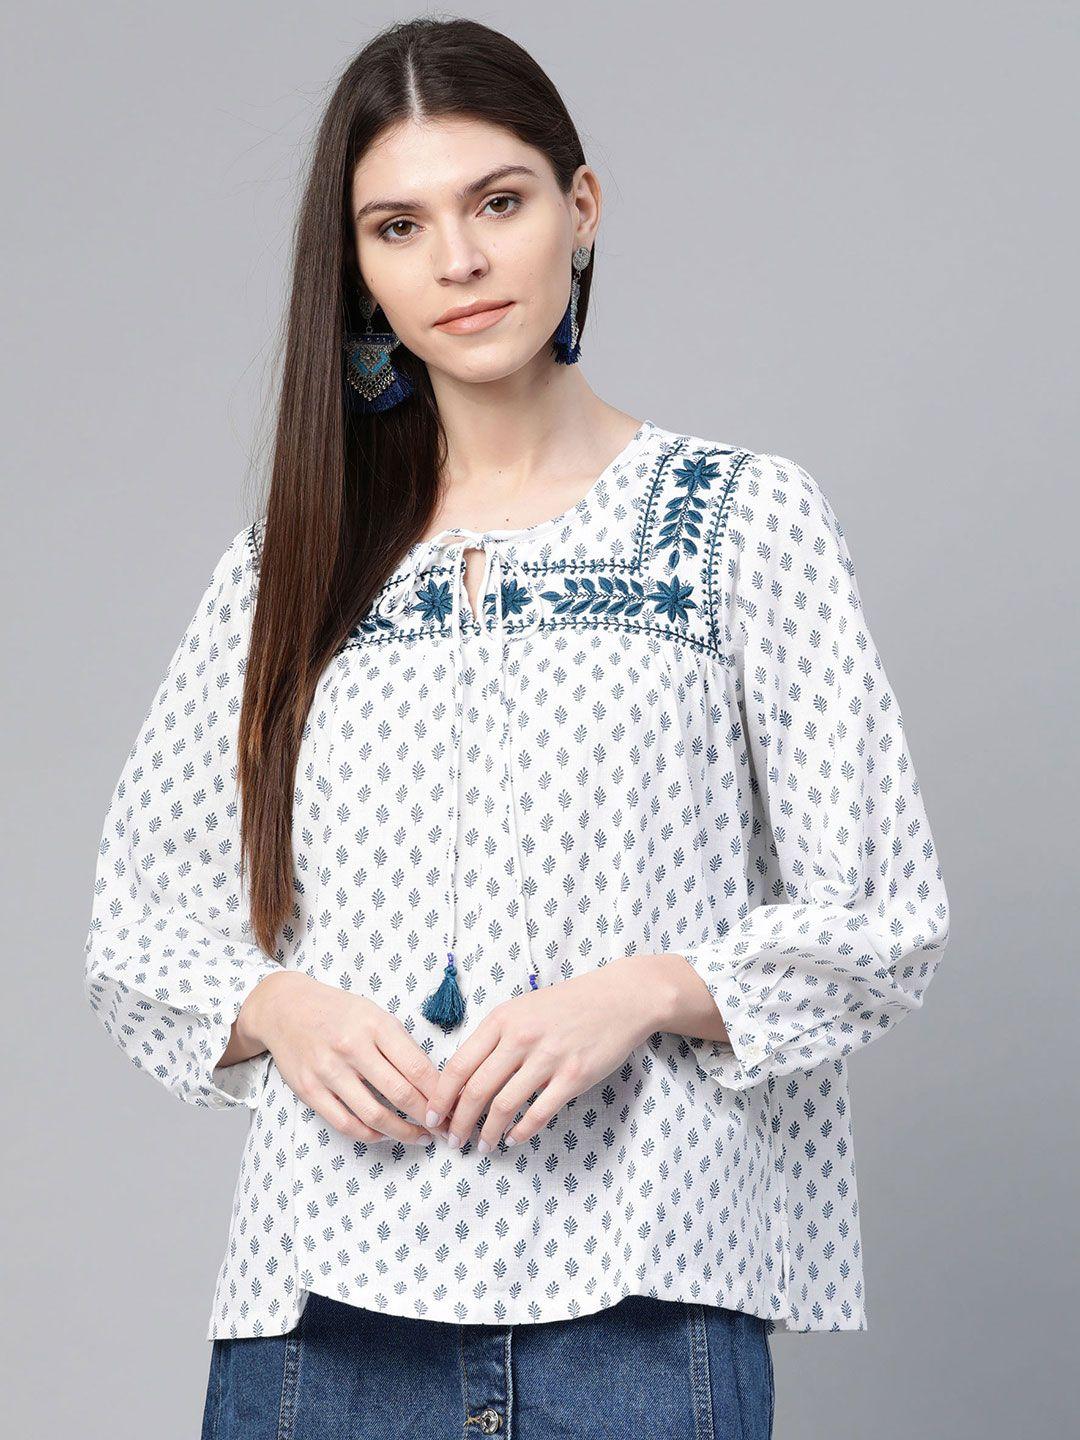 rangriti women white & teal blue embroidered ethnic printed top